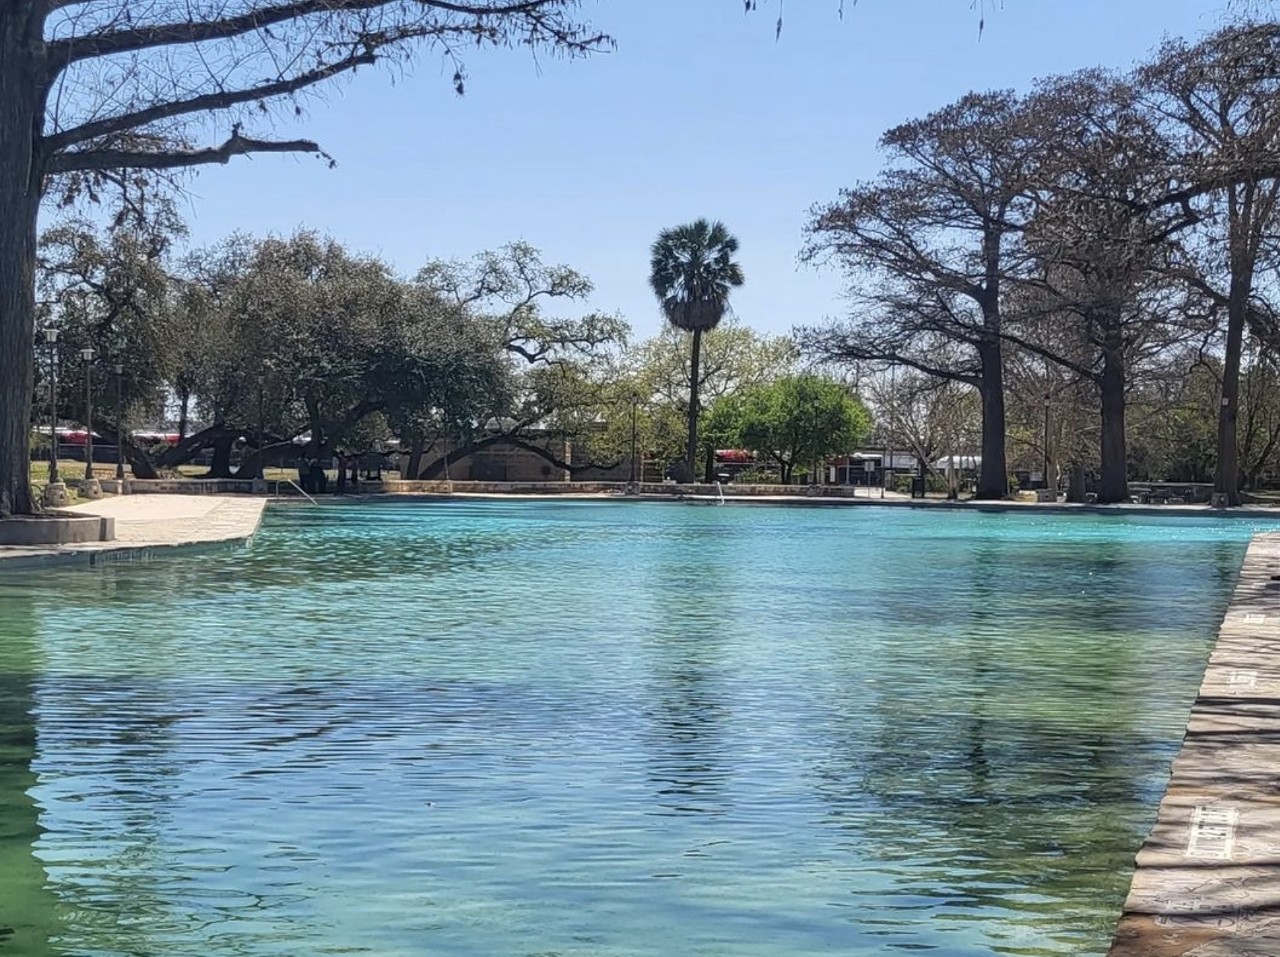 San Pedro Springs Park
2200 N. Flores St., (210) 732-5992, sanantonio.gov 
The blue, clear waters found in San Pedro Springs Park have been used since hunters and gatherers roamed the land nearby and drank from its springs. As the second oldest public space in America, many San Antonians’ ancestors have swam in the park’s pool. There’s no fee for locals looking to jump in this cold-refreshing water hole in the summer, and its beauty can be enjoyed year round.